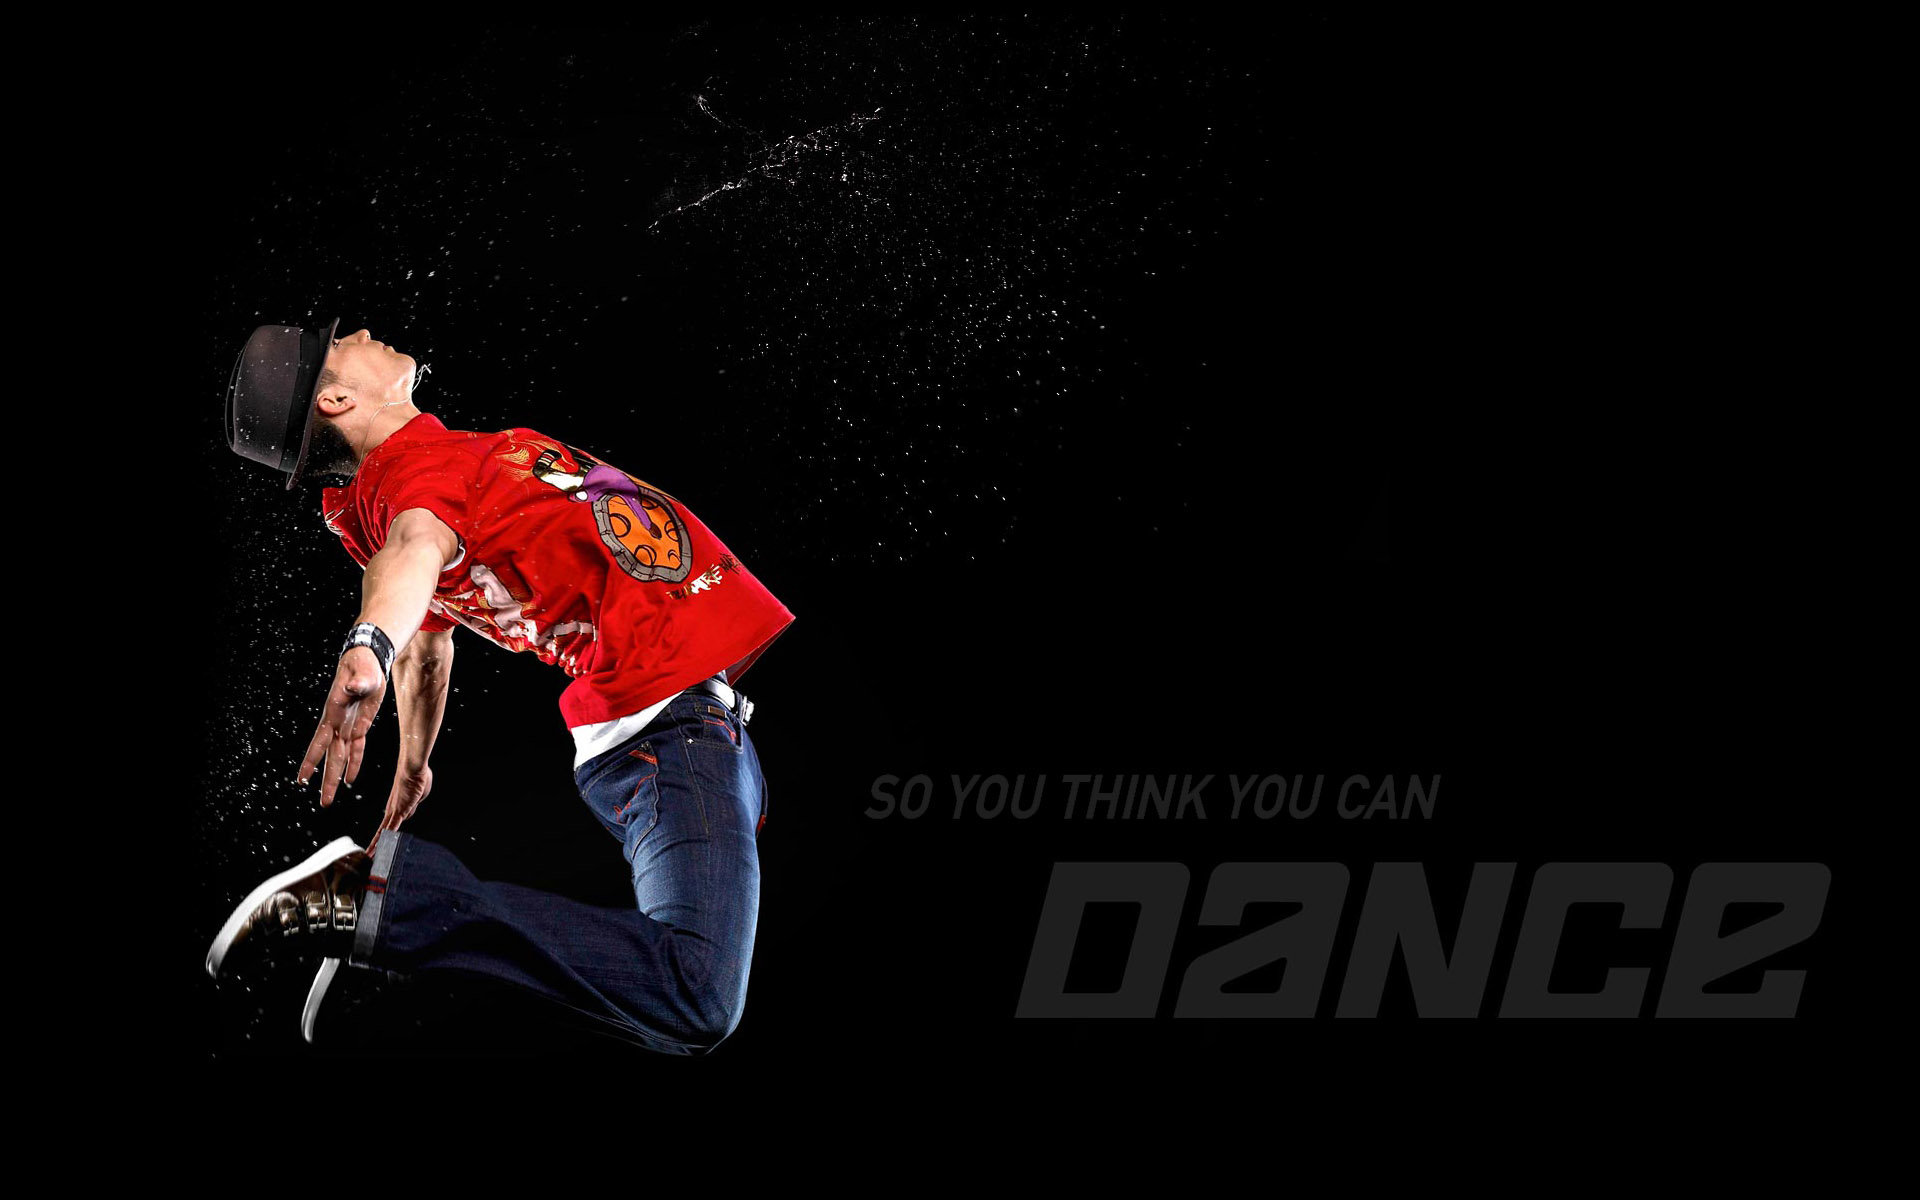 Download hd 1920x1200 So You Think You Can Dance desktop background ID:162694 for free